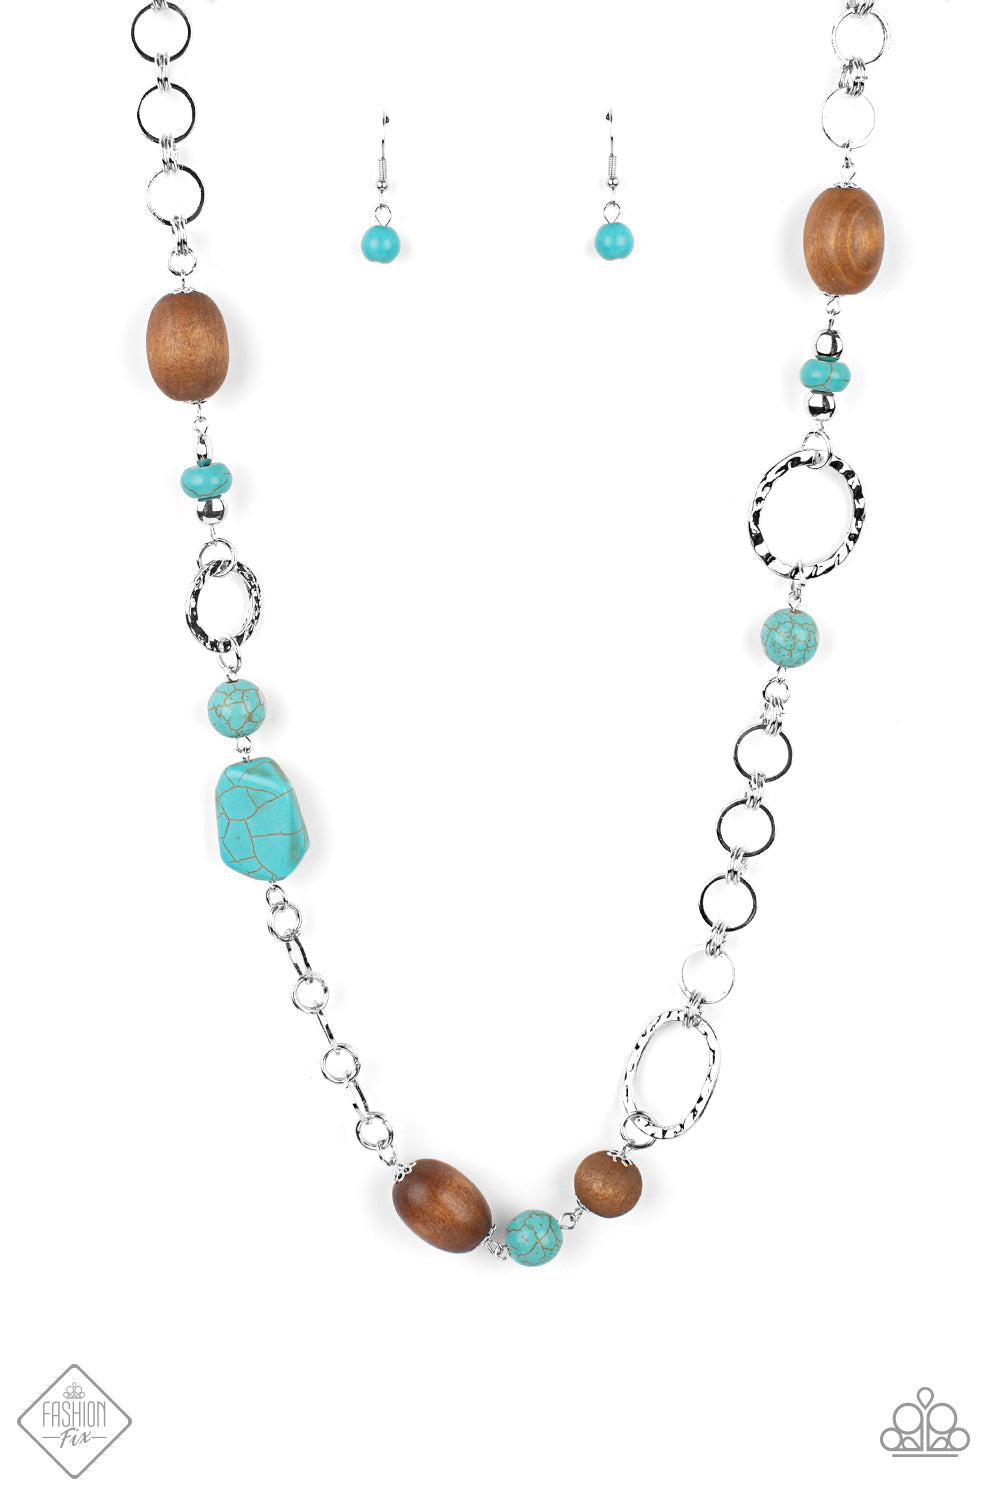 Prairie Reserve - Blue Turquoise - Silver - Wood Necklace - Paparazzi Accessories - Assortment of turquoise stones, wooden beads, and silver accents sporadically adorn a double-linked silver chain, creating an earthy display across the chest. Features an adjustable clasp closure. 